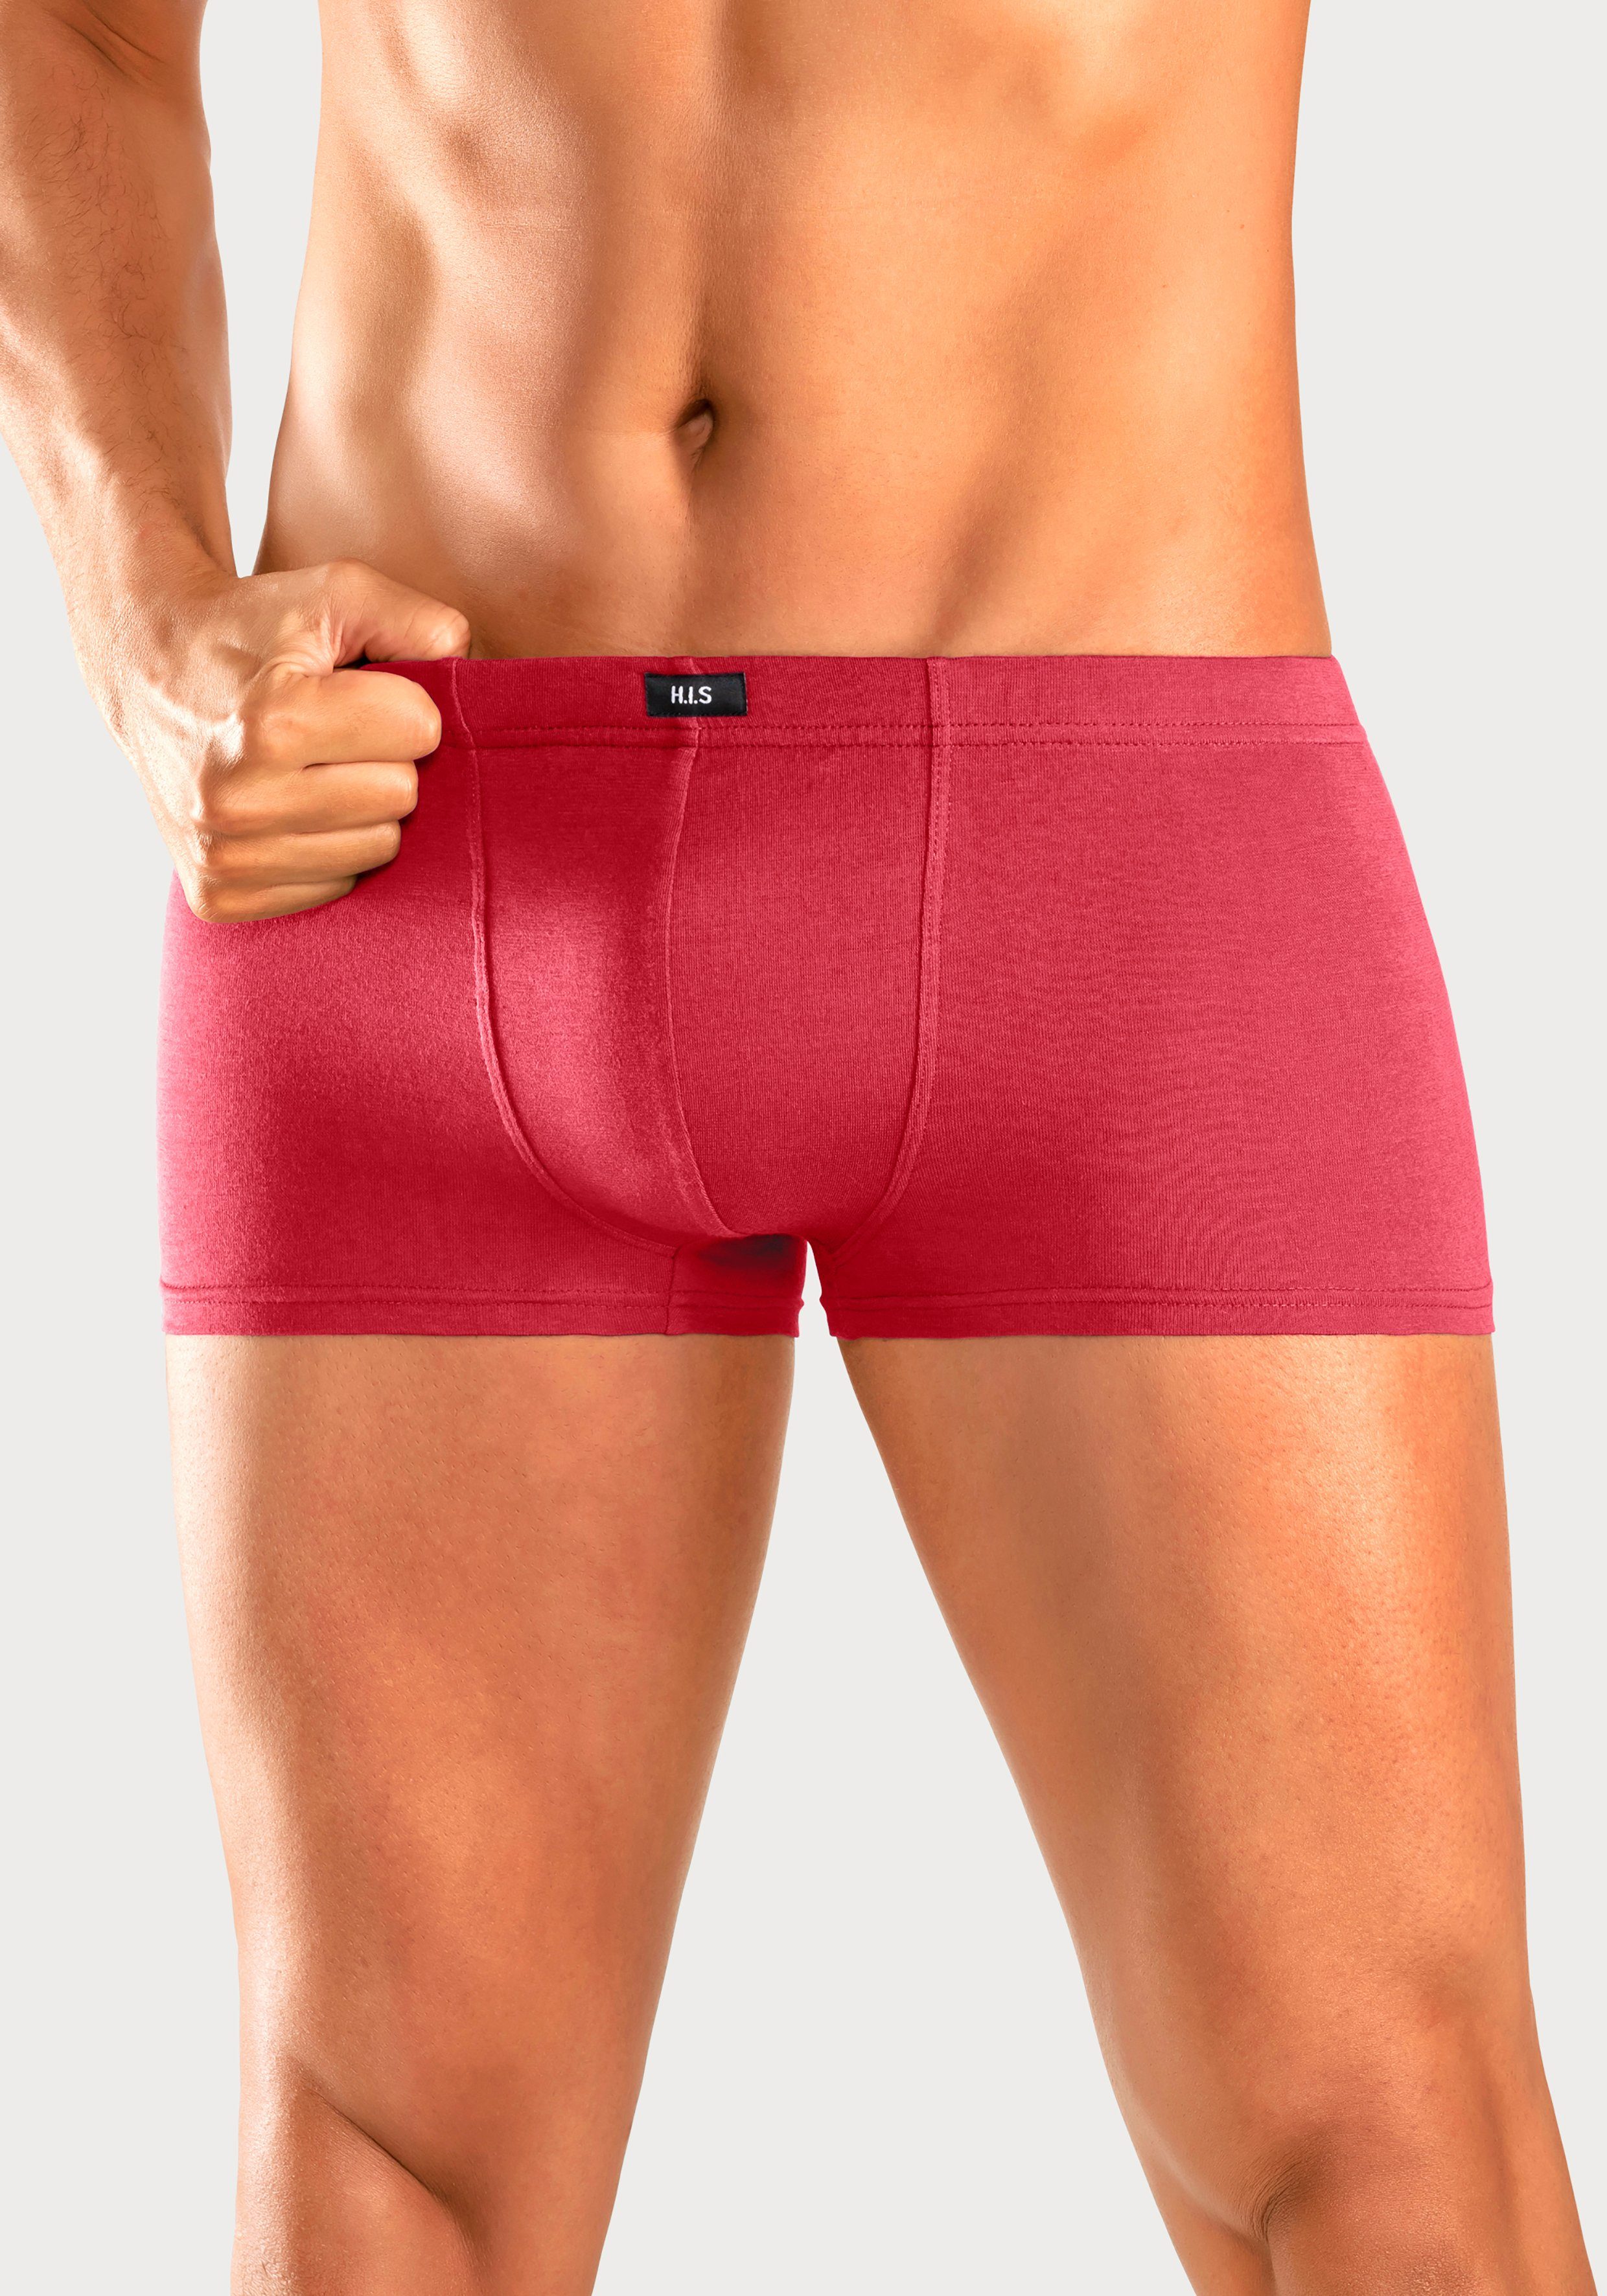 H.I.S Boxershorts (Packung, 5-St) in Hipster-Form aus Baumwollstretch, H.I.S  Hipster im 5er Pack | Klassische Panties